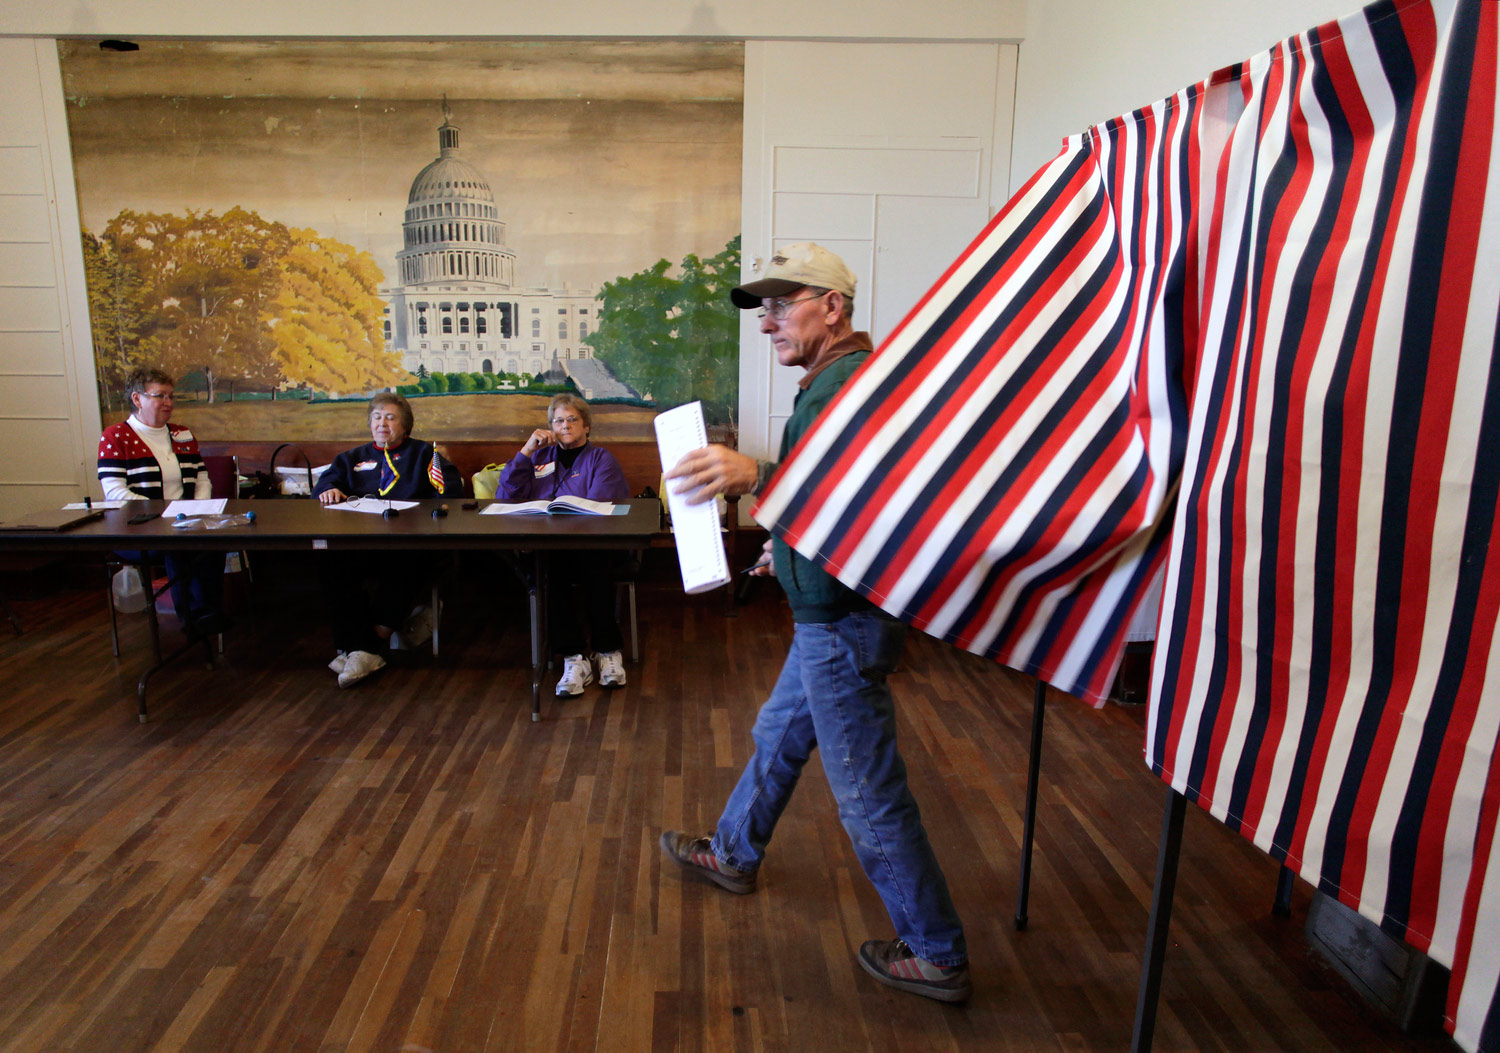 What to Do About Record Low Voter Turnout? Call a Holiday!